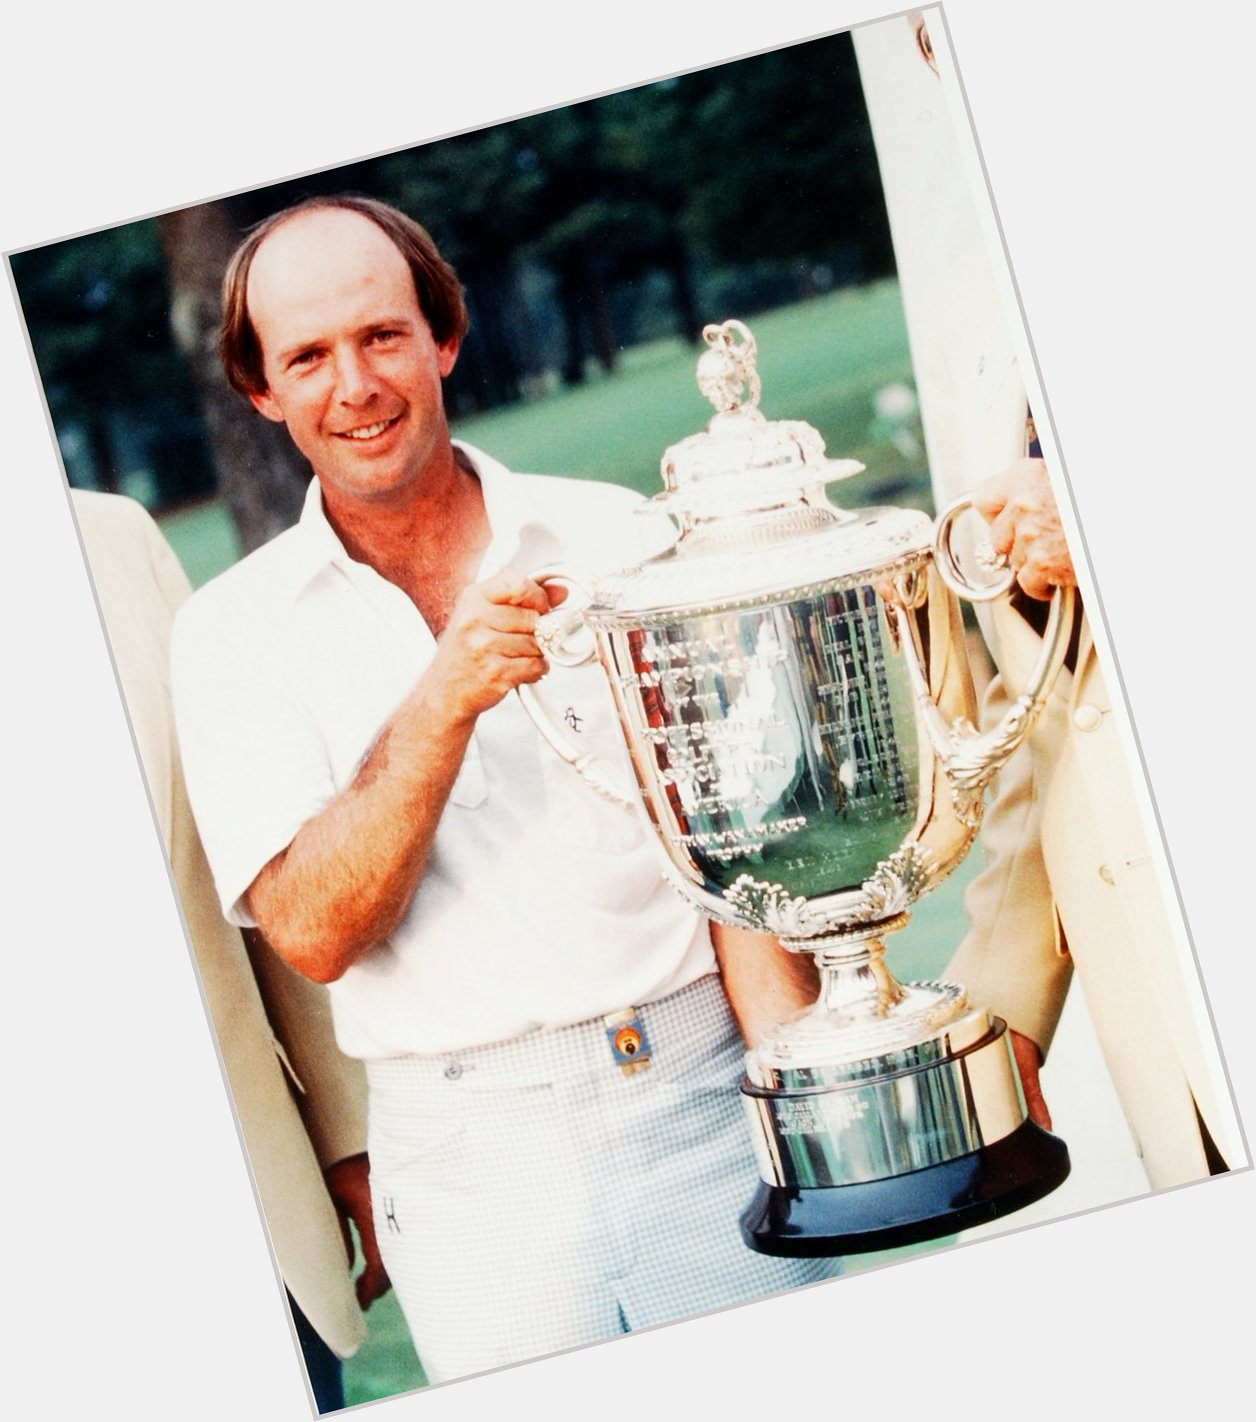 Wishing Larry Nelson, our two-time PGA Champion, a happy birthday. 